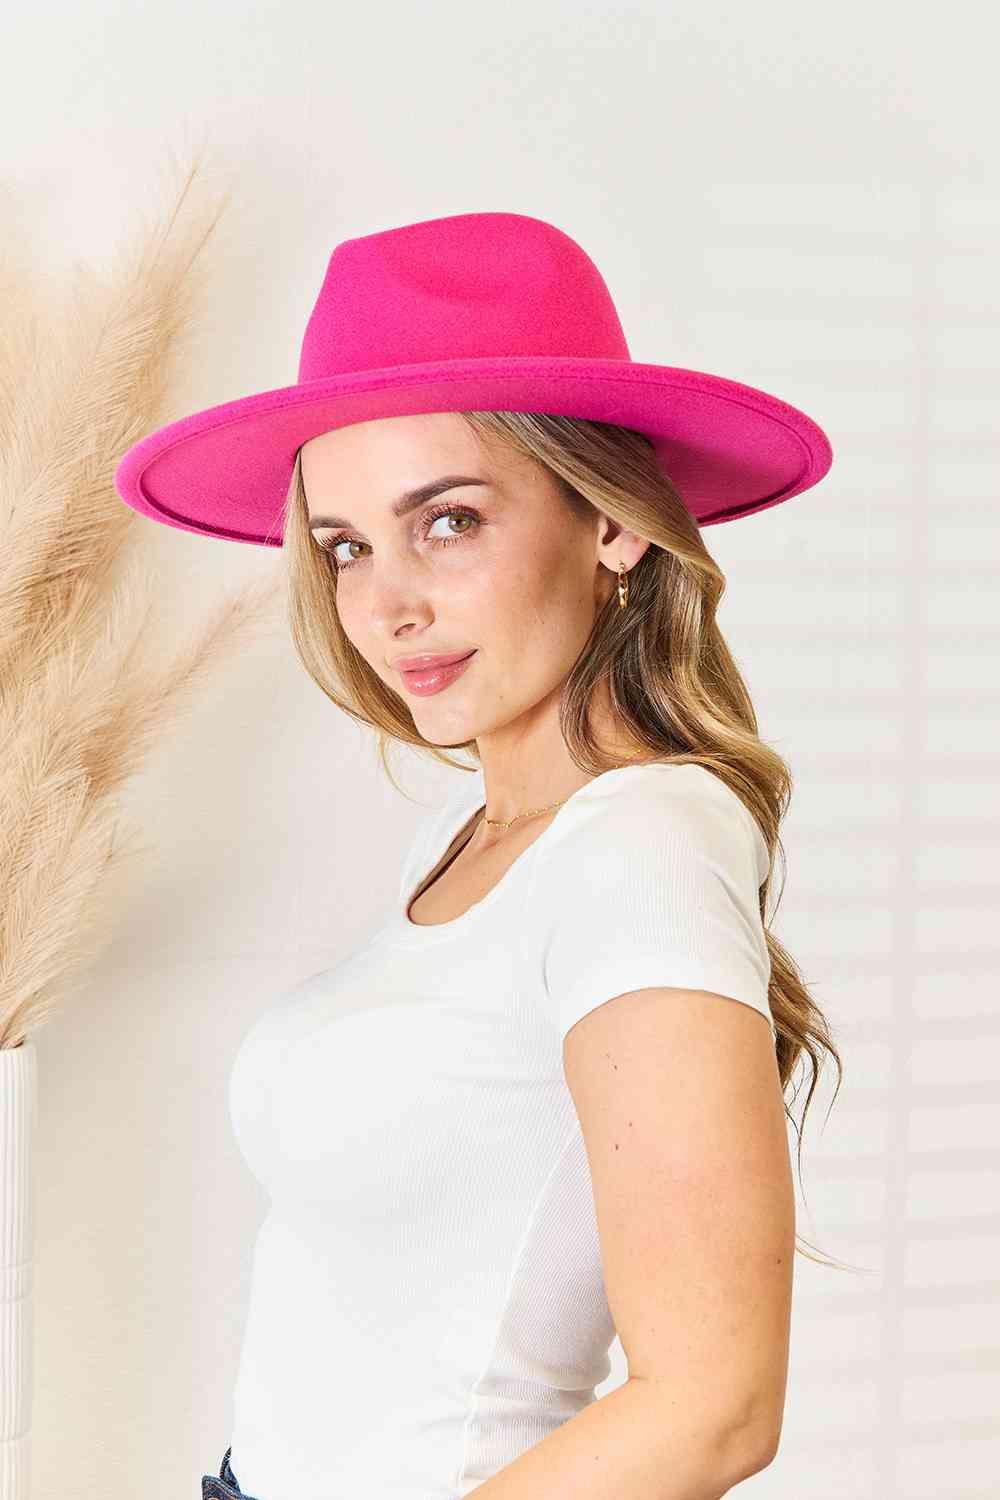 a woman in a white shirt and a pink hat